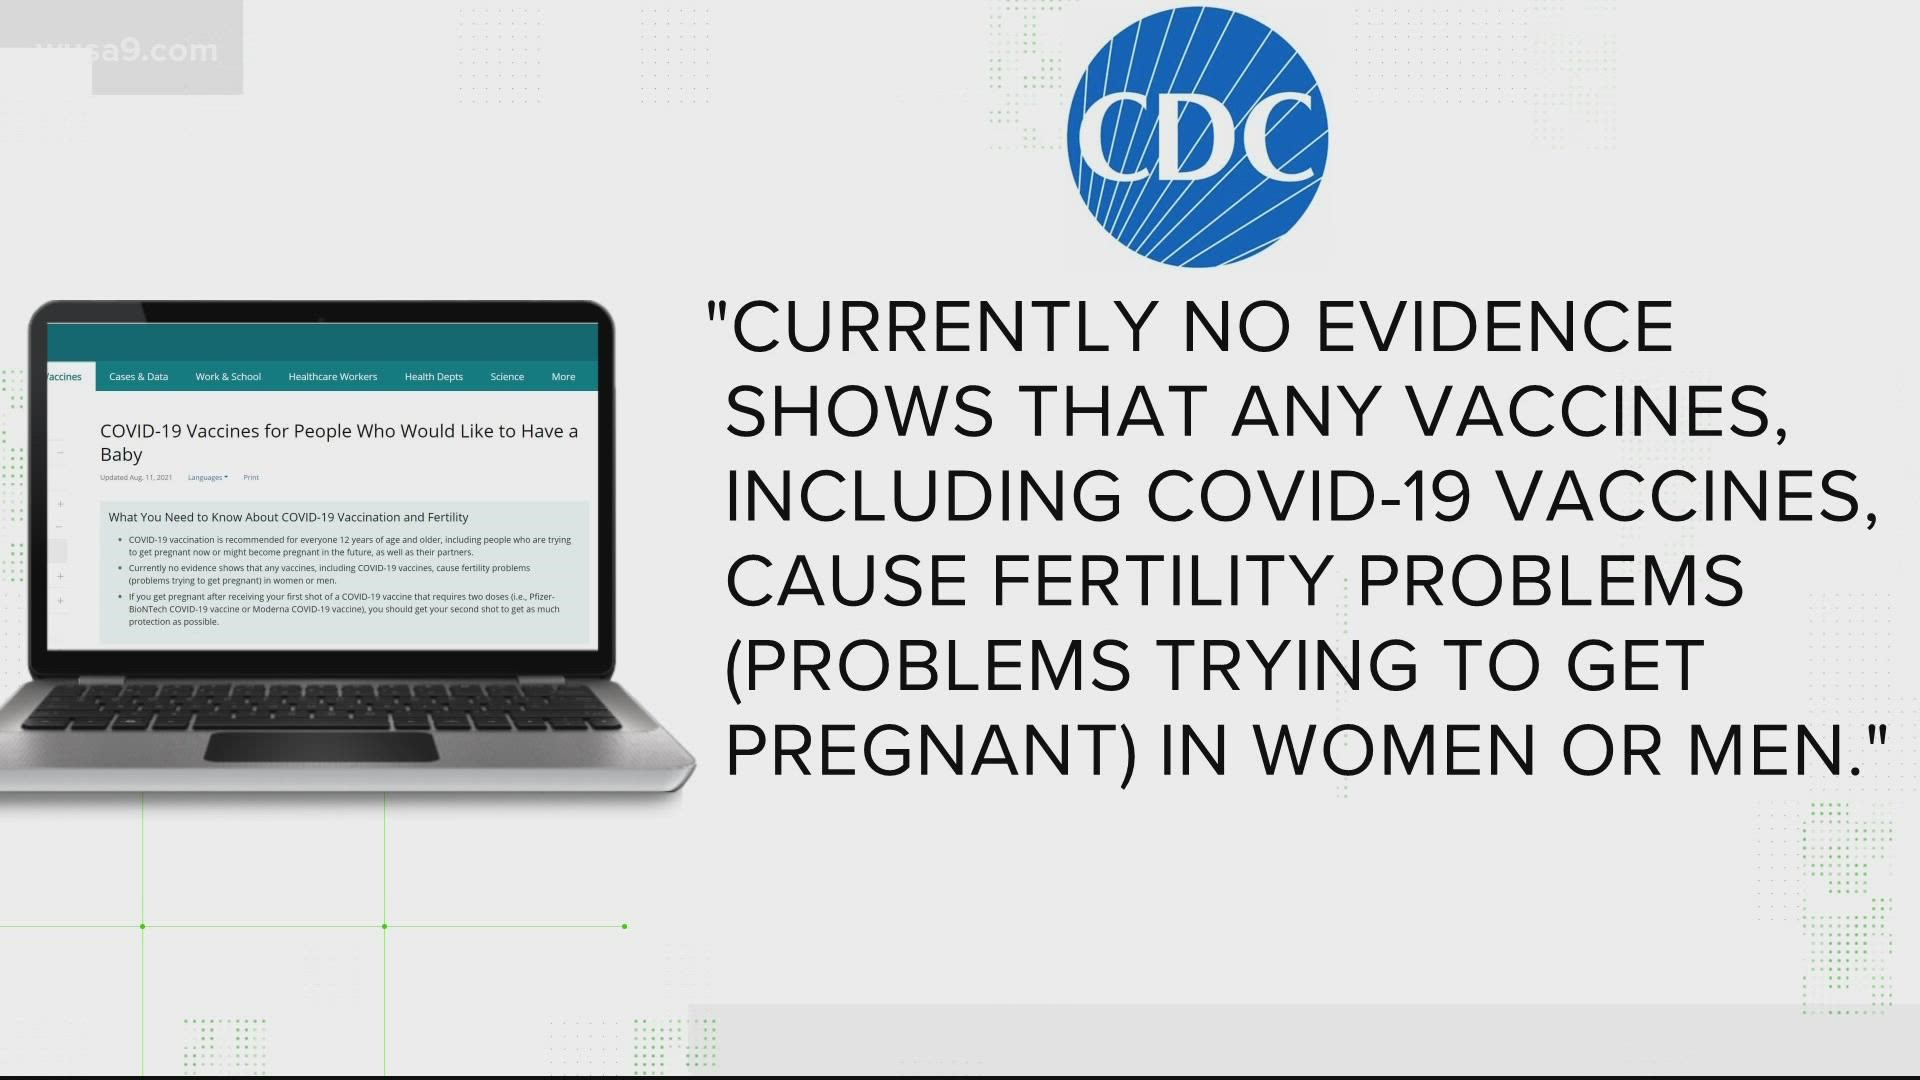 Rumors online claim the COVID-19 vaccines cause infertility. Two experts explain they are specifically designed not to harm our bodies.